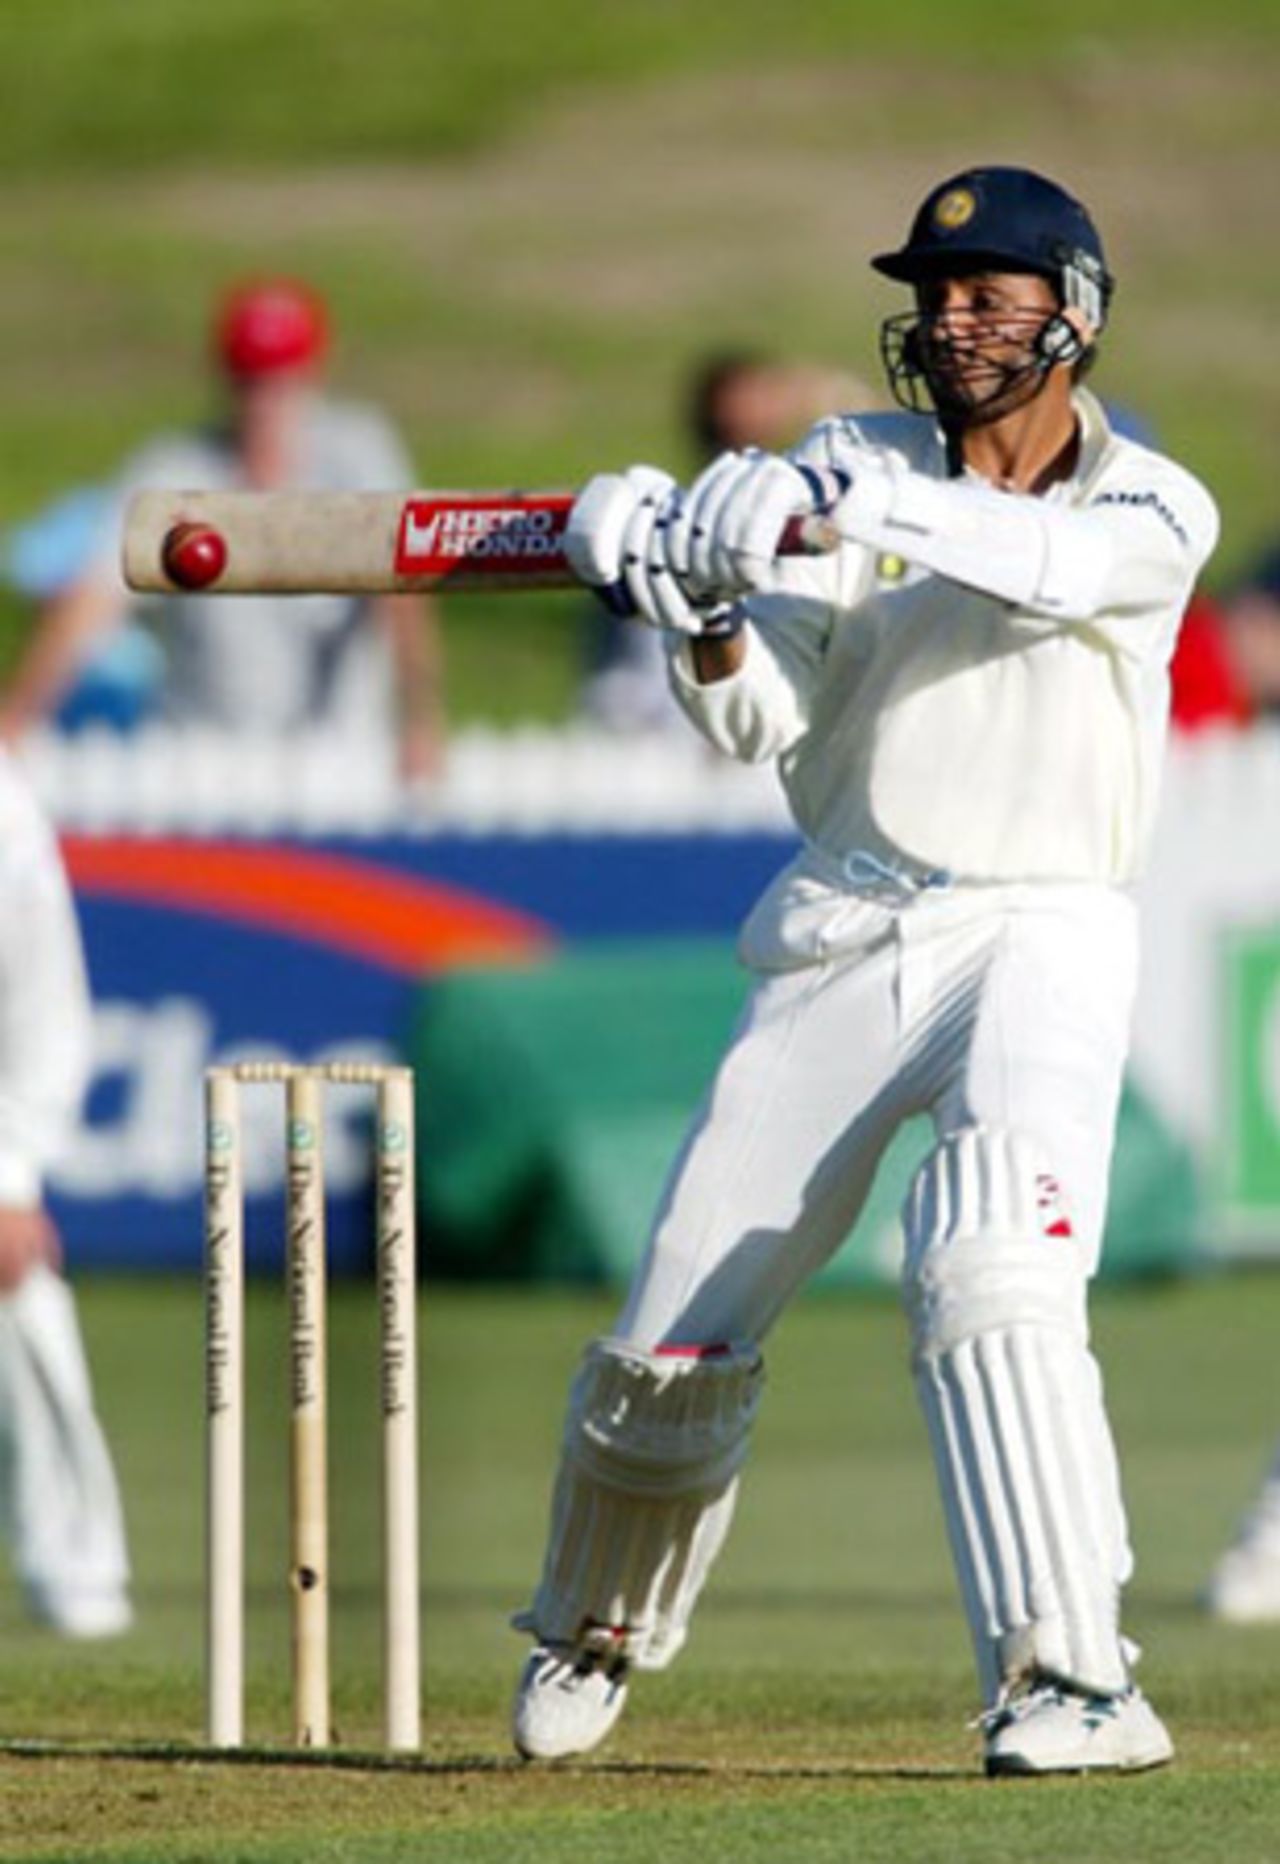 Indian batsman Harbhajan Singh hits a delivery from New Zealand bowler Shane Bond to the cover boundary for four during his first innings of 20.